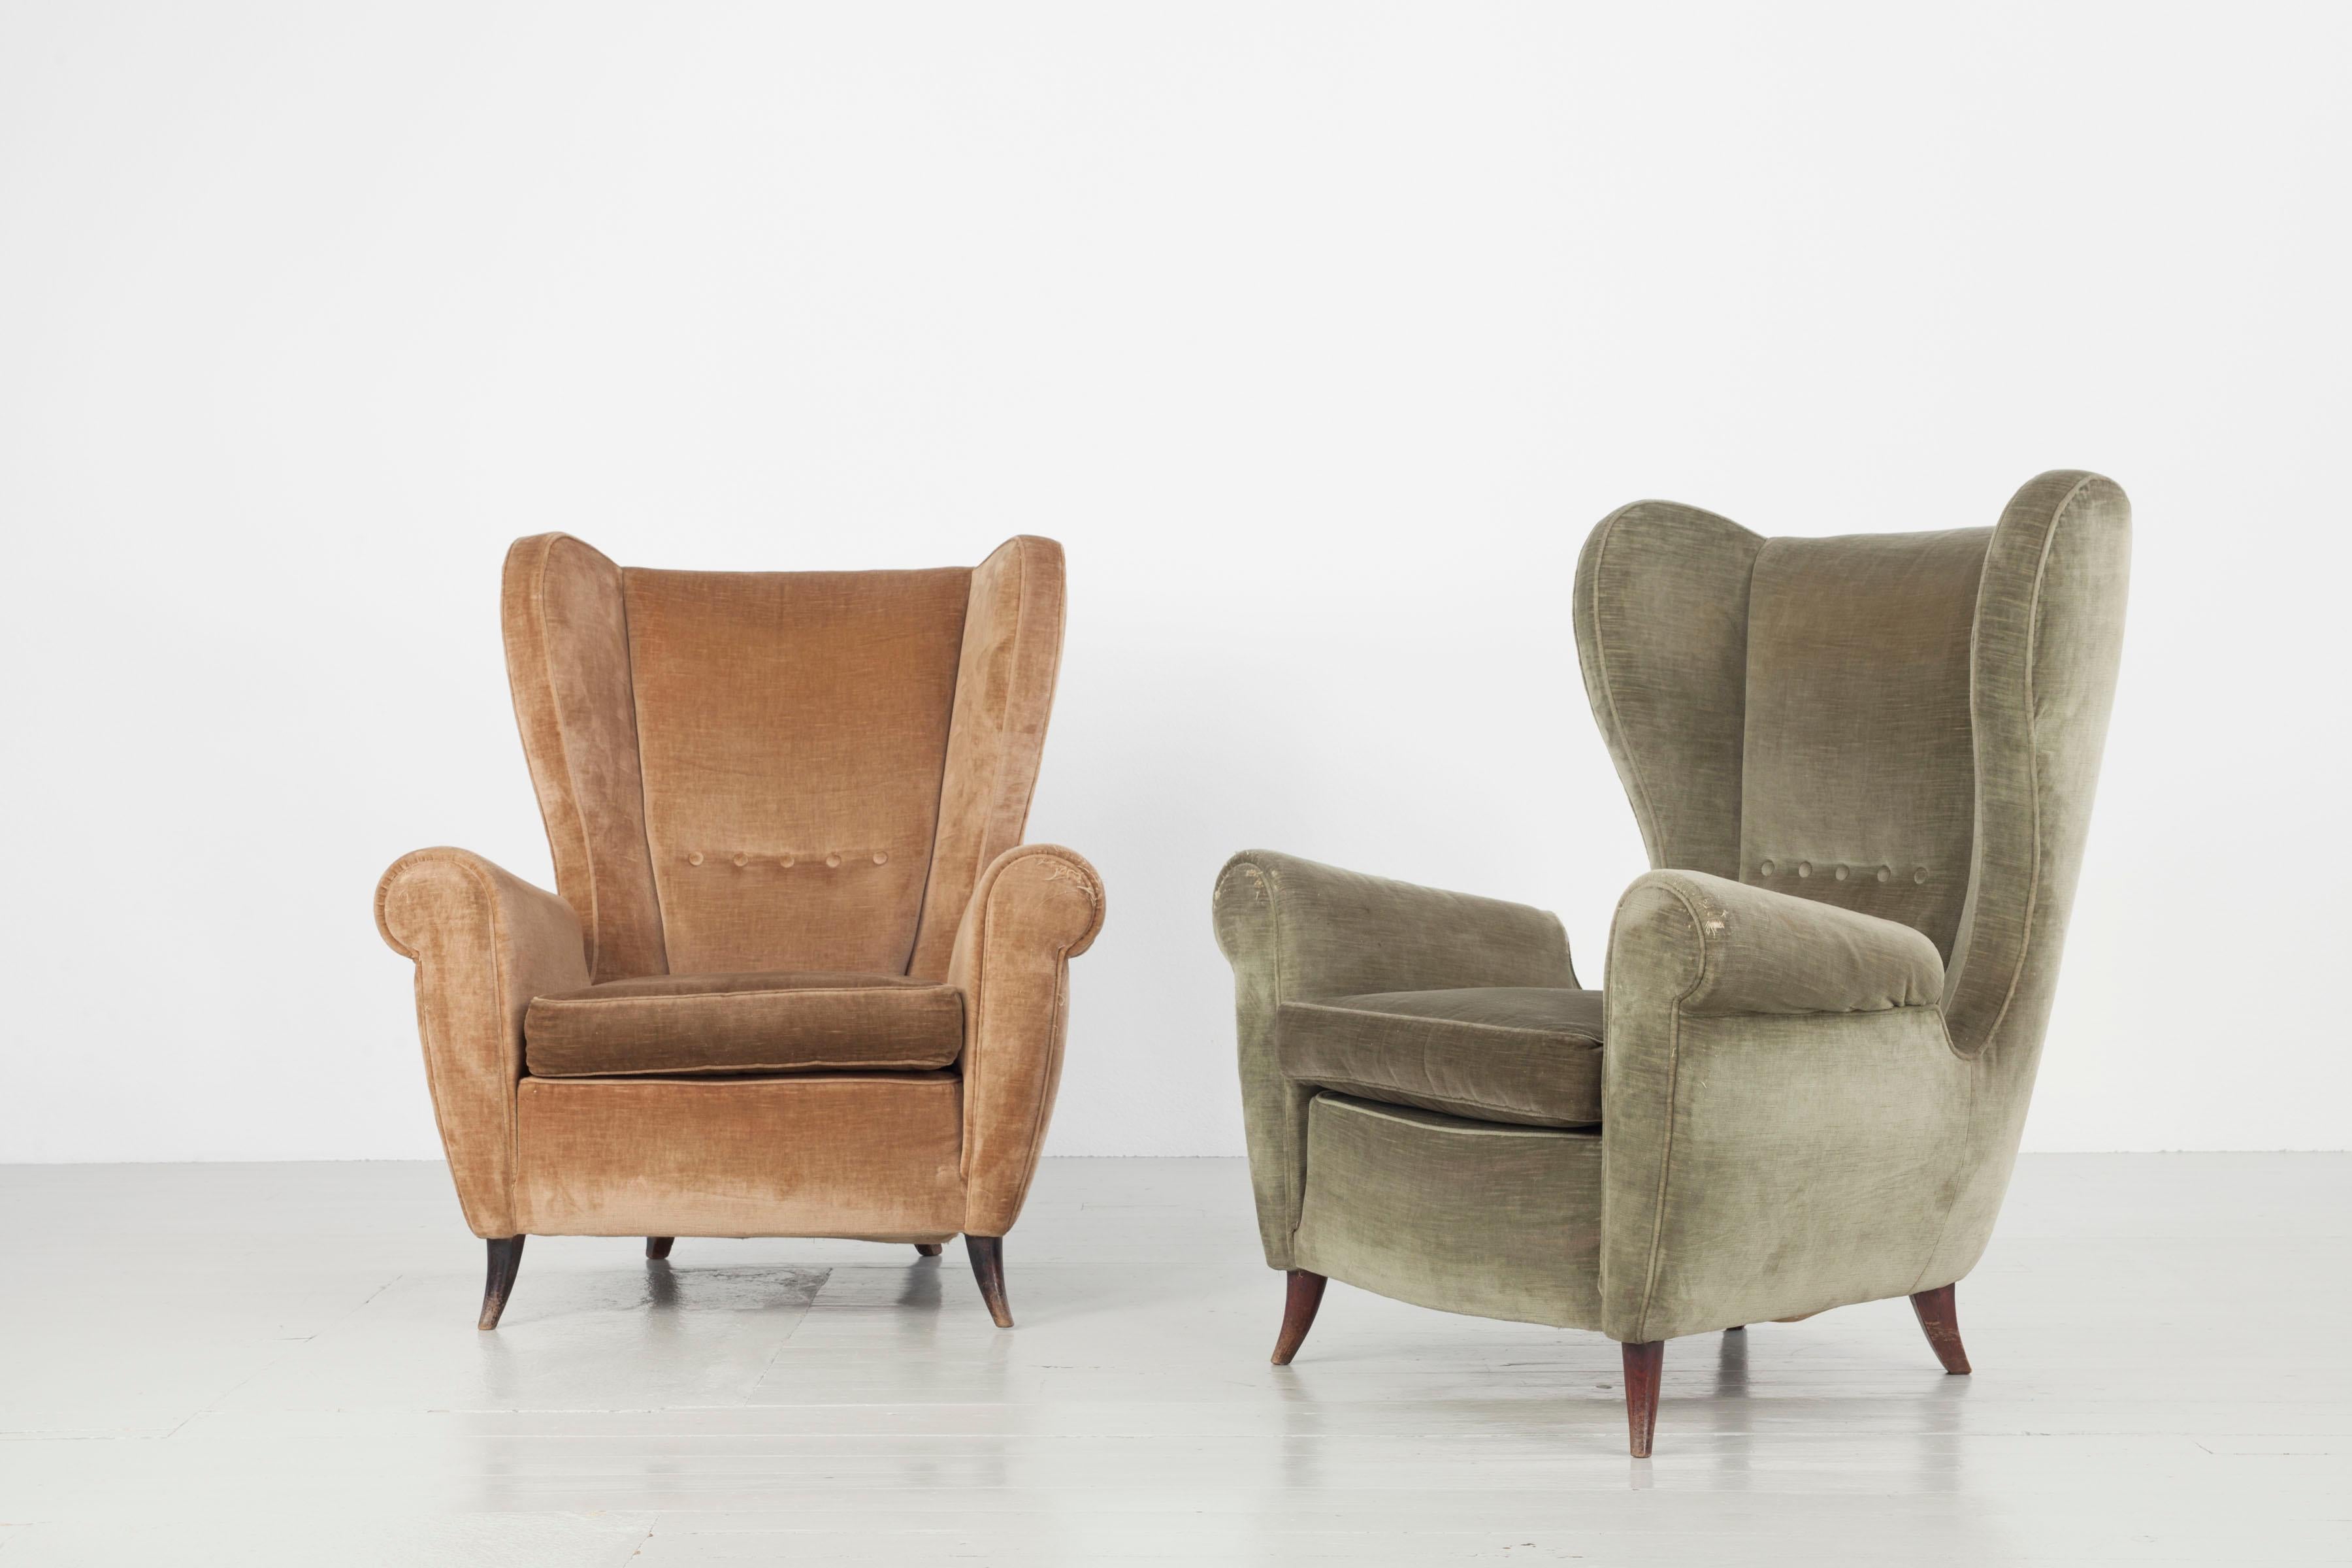 Set of Two Italian Armchairs in Original Upholstery of Brown and Green, 1950s For Sale 5